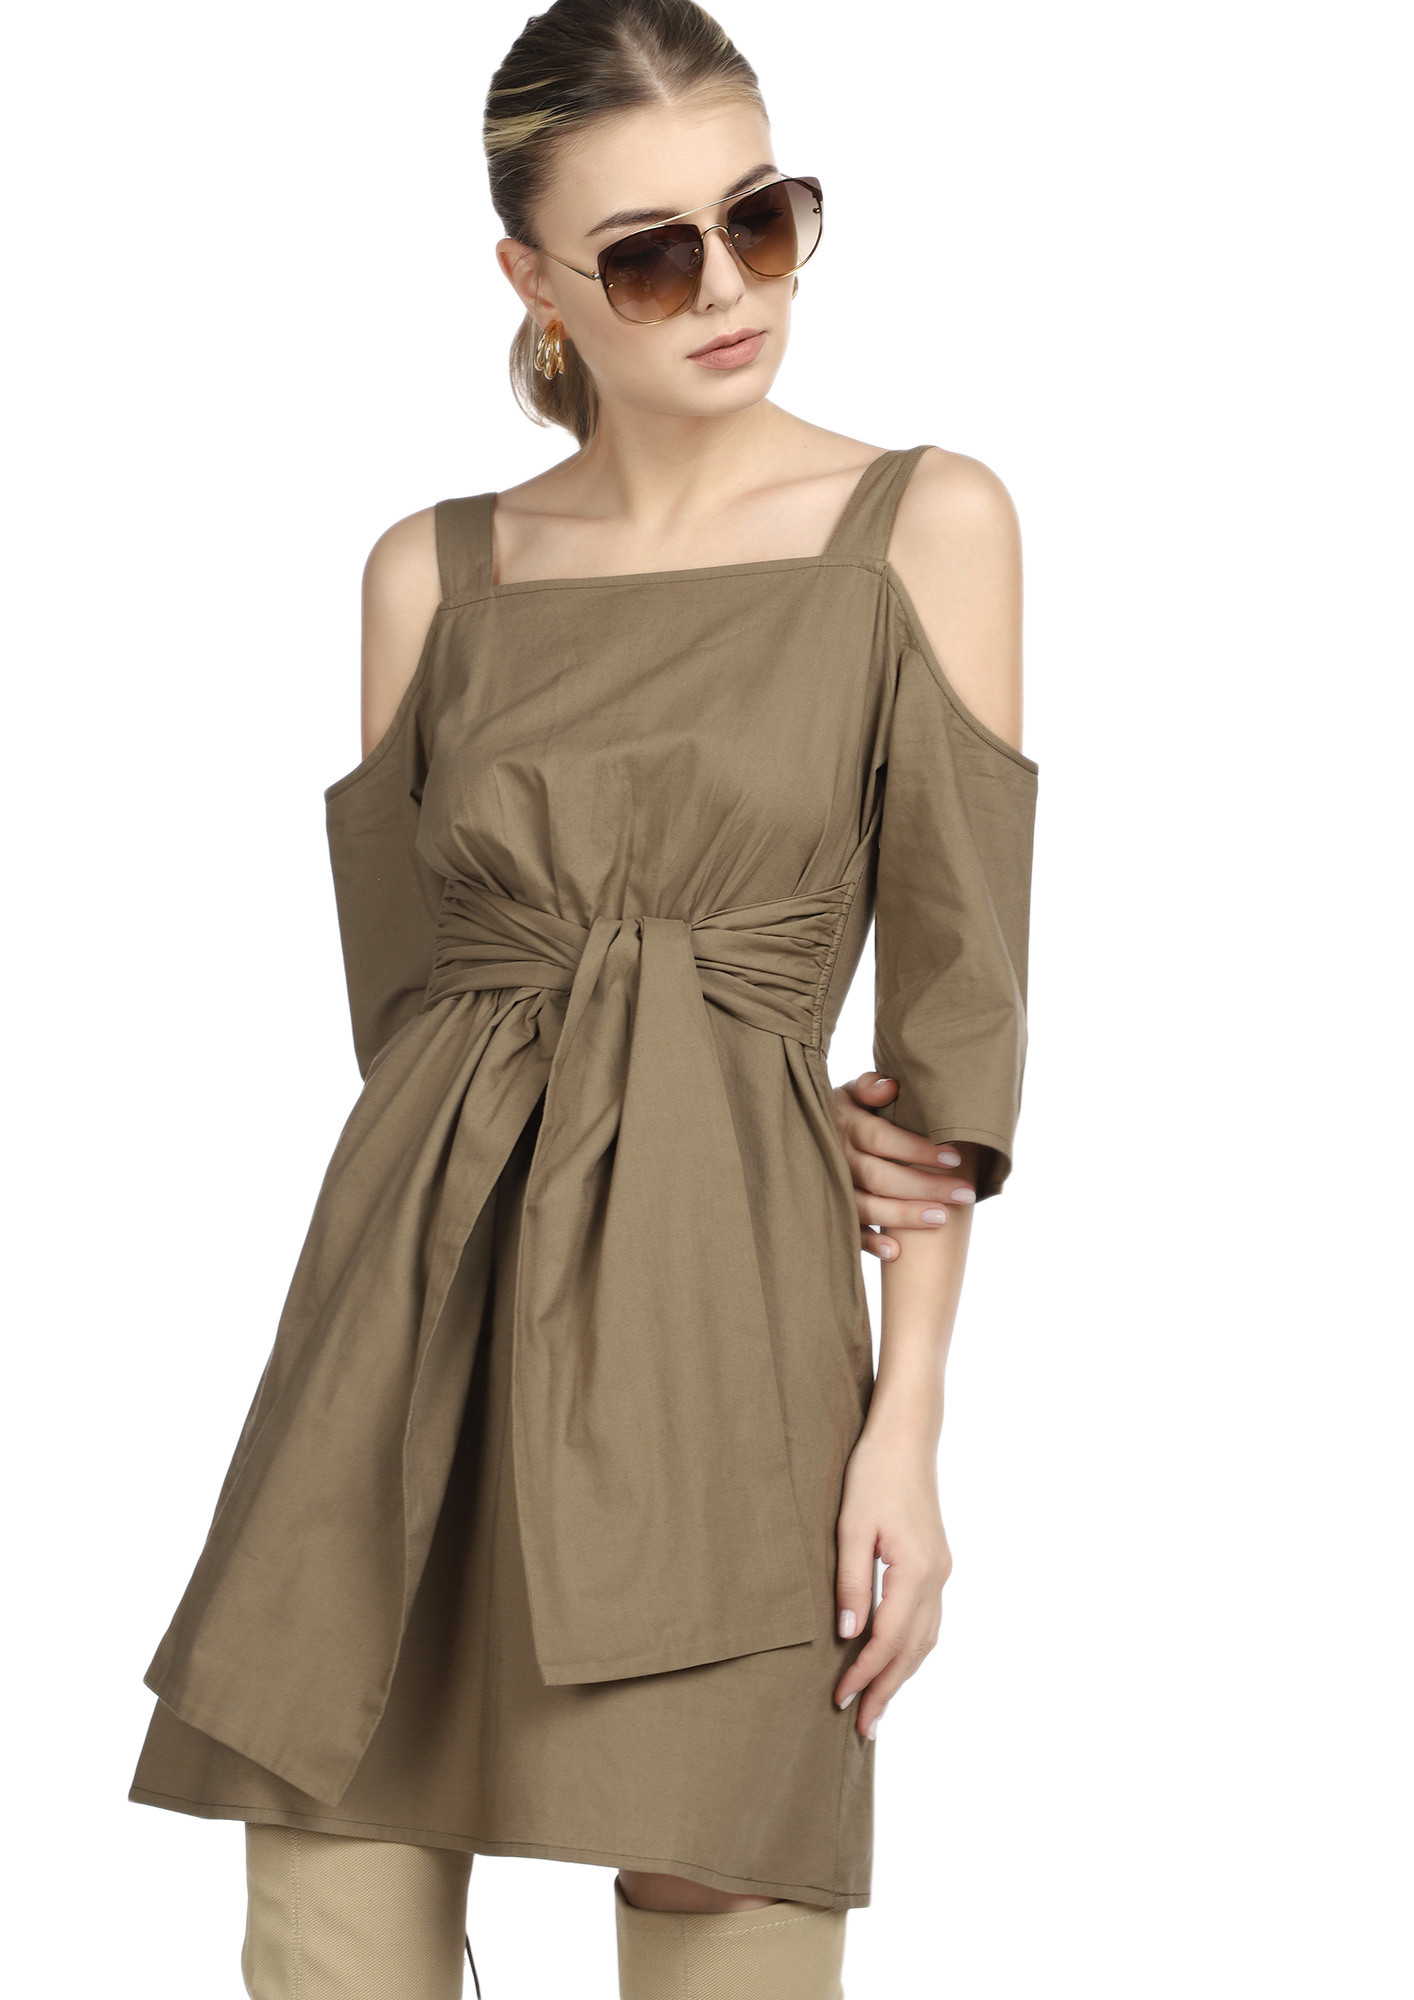 PERFECTLY BALANCED OLIVE BROWN SHIFT DRESS